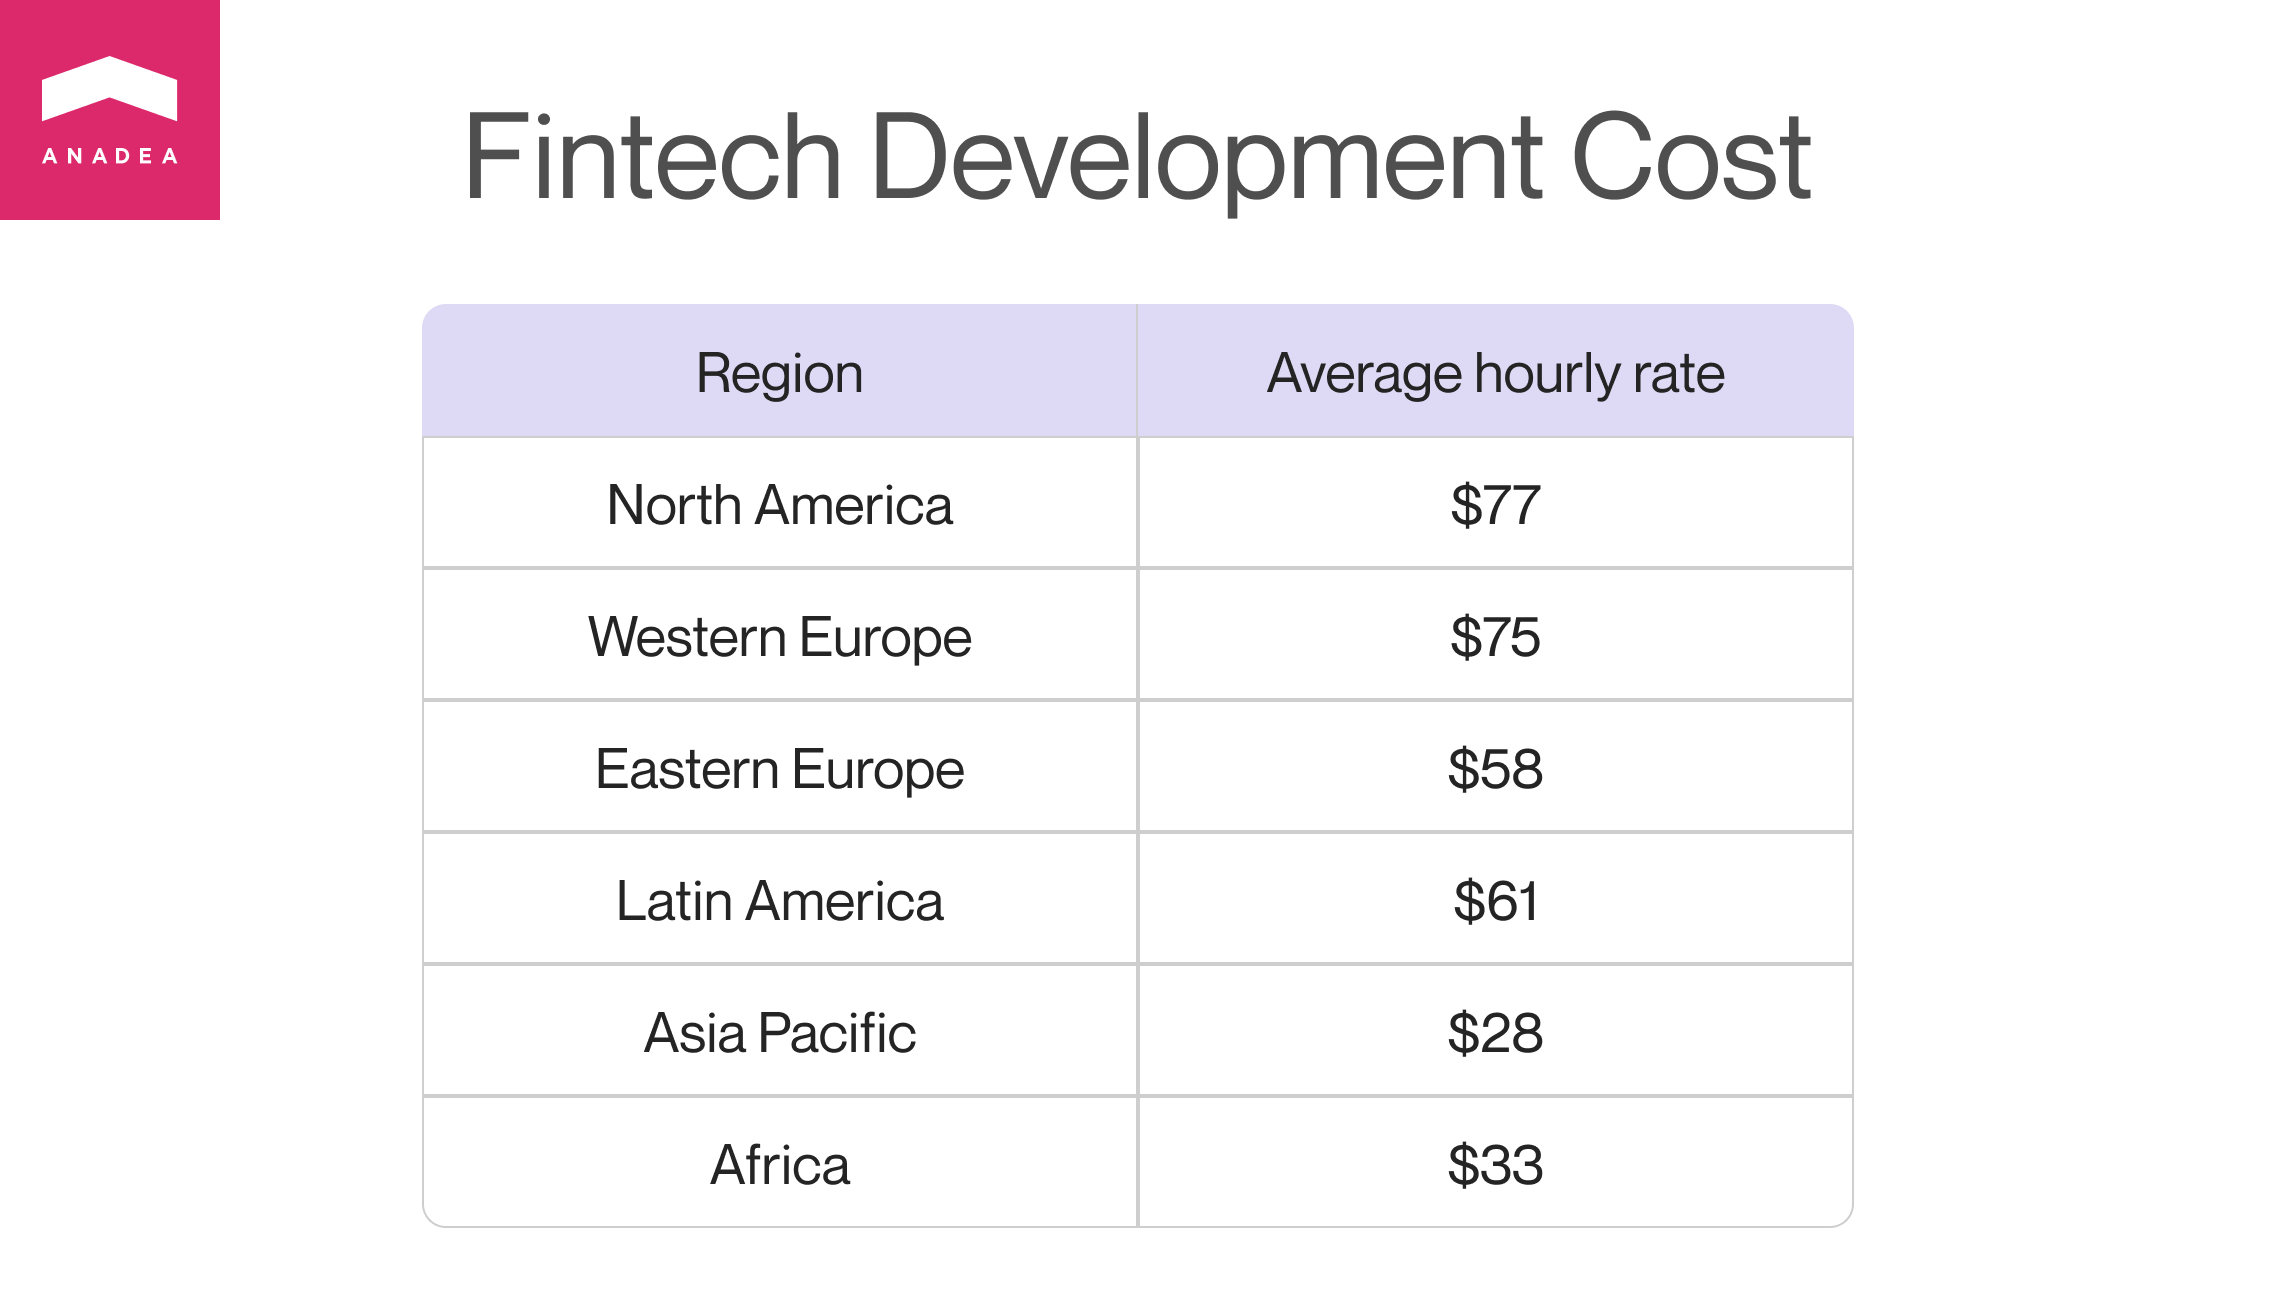 A table comparing average hourly rates in different regions. North America leads with $77, followed by Western Europe at $75, Eastern Europe at $58, Latin America at $61, Asia Pacific at $28, and Africa at $33.